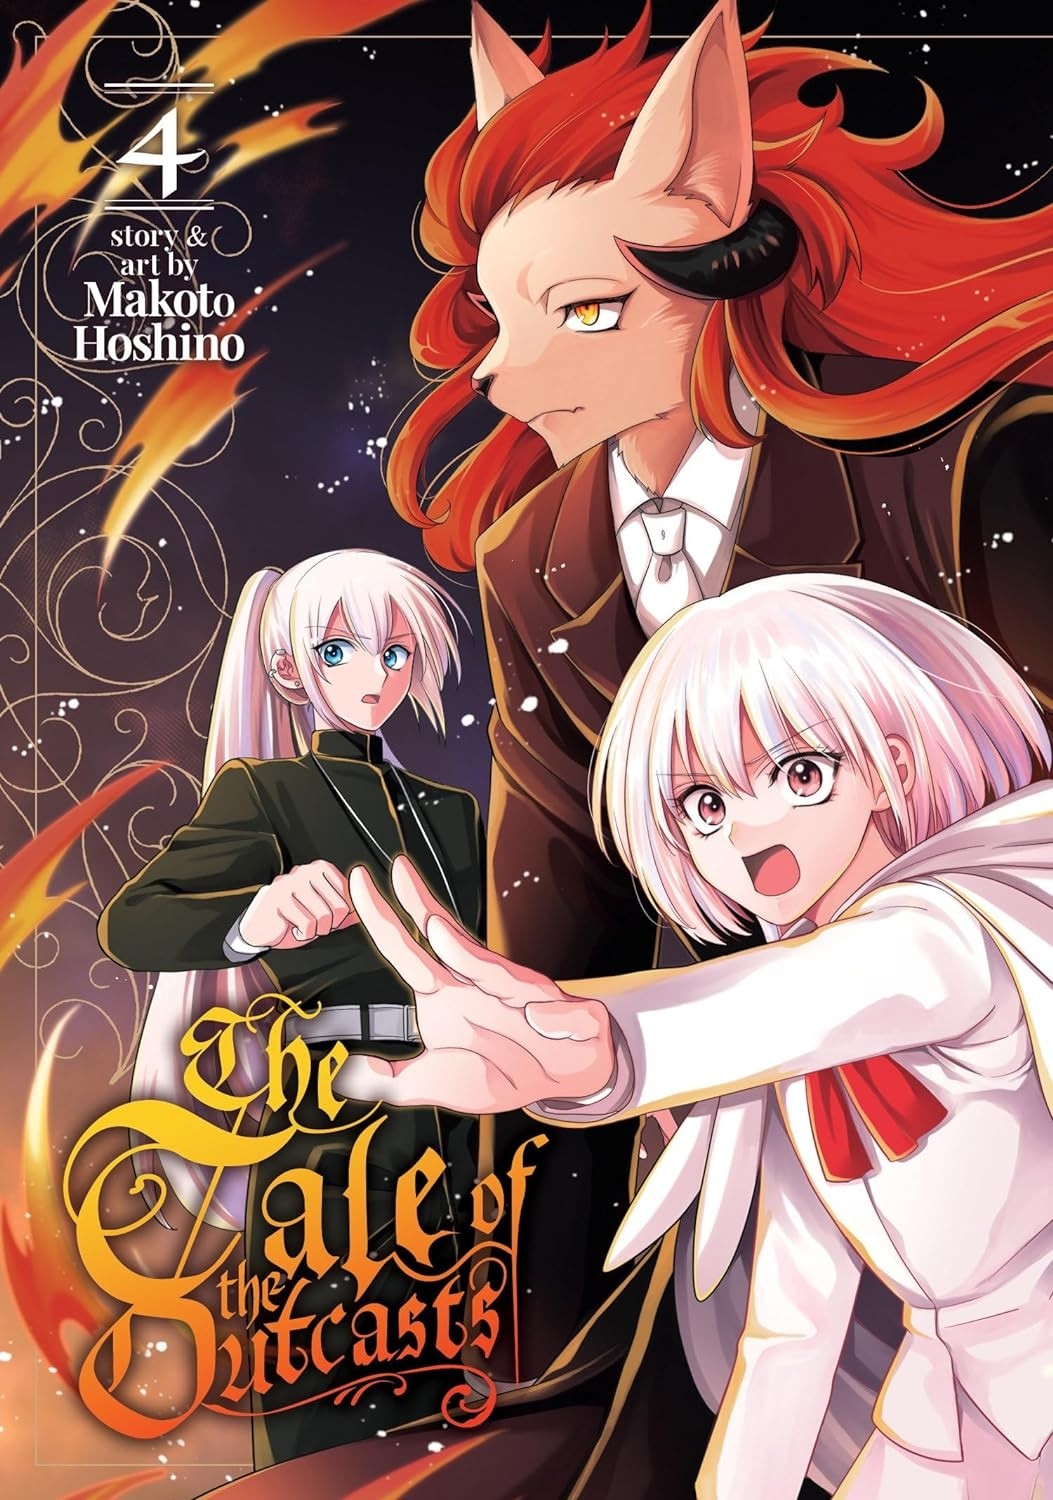 The Tale of the Outcasts, Vol. 04